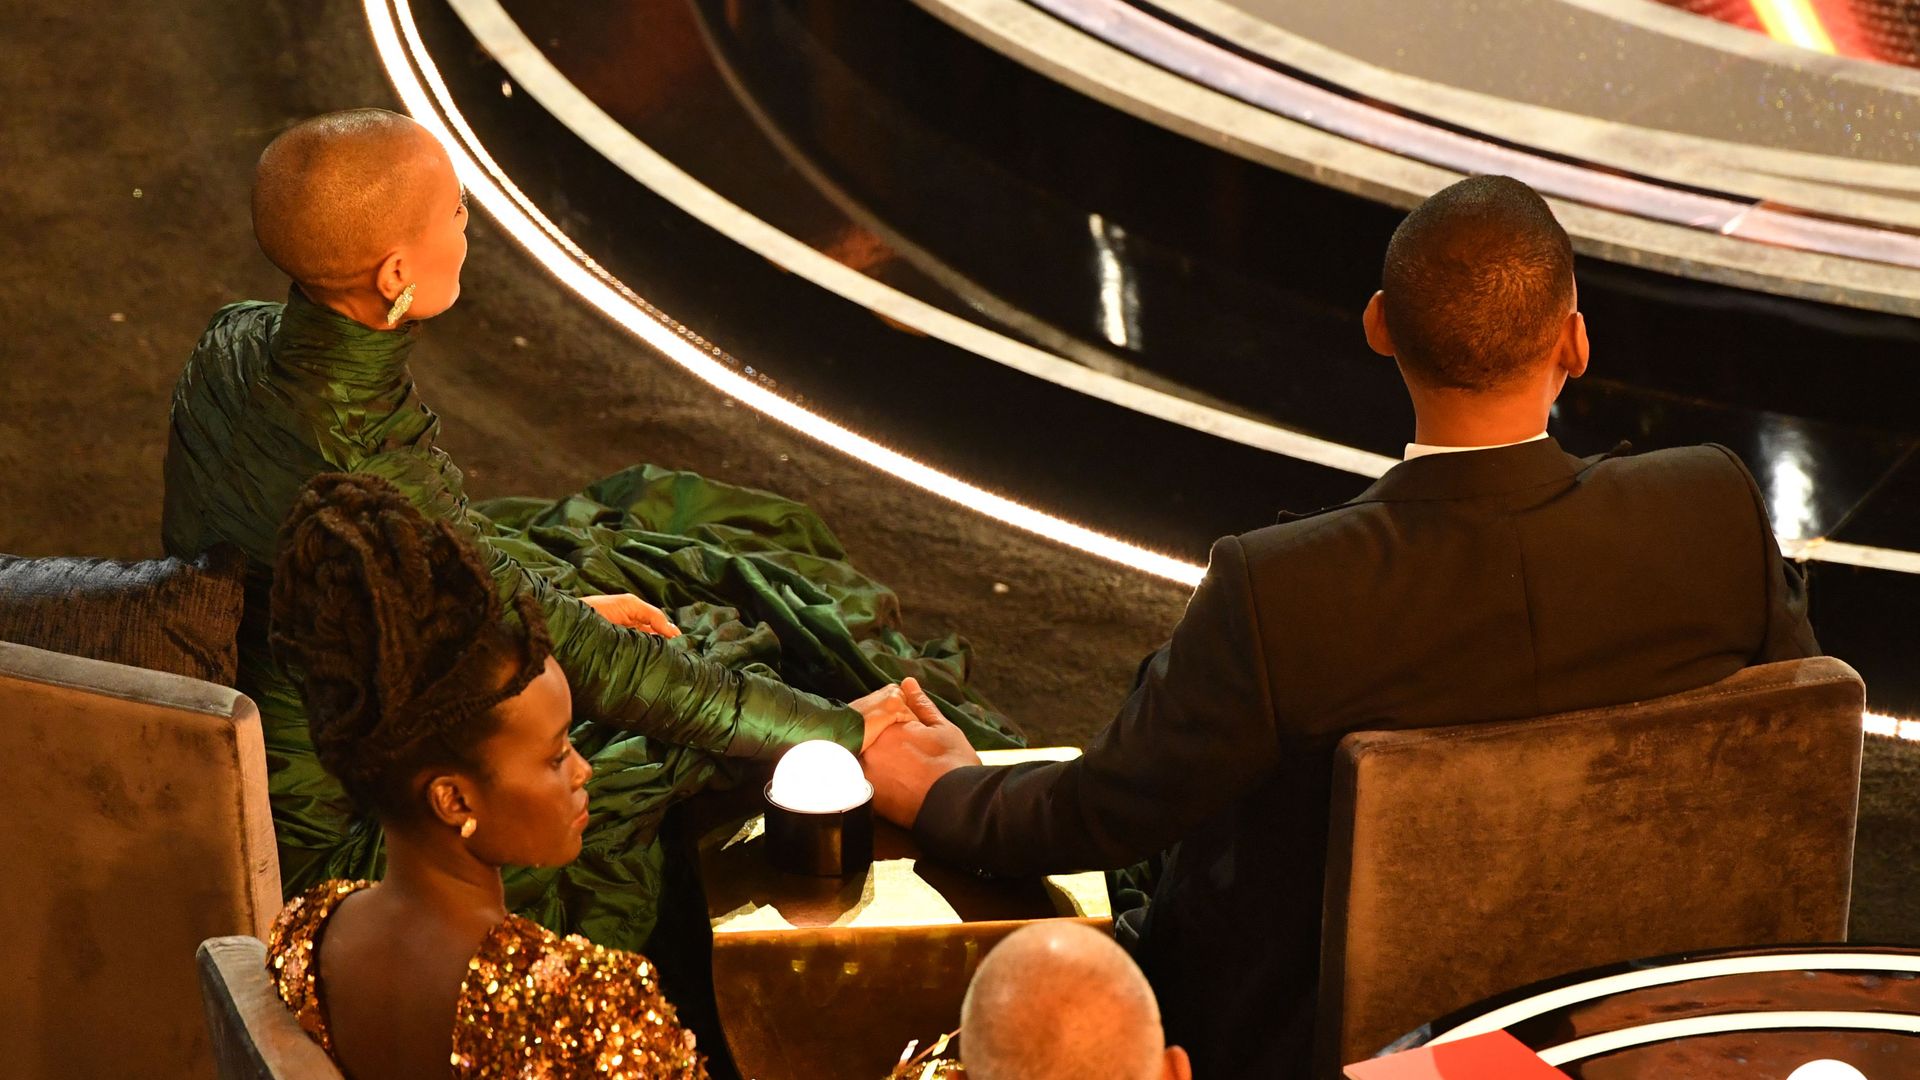 Will Smith sat holding Jada Pinkett Smith's hands at the Oscars in 2022